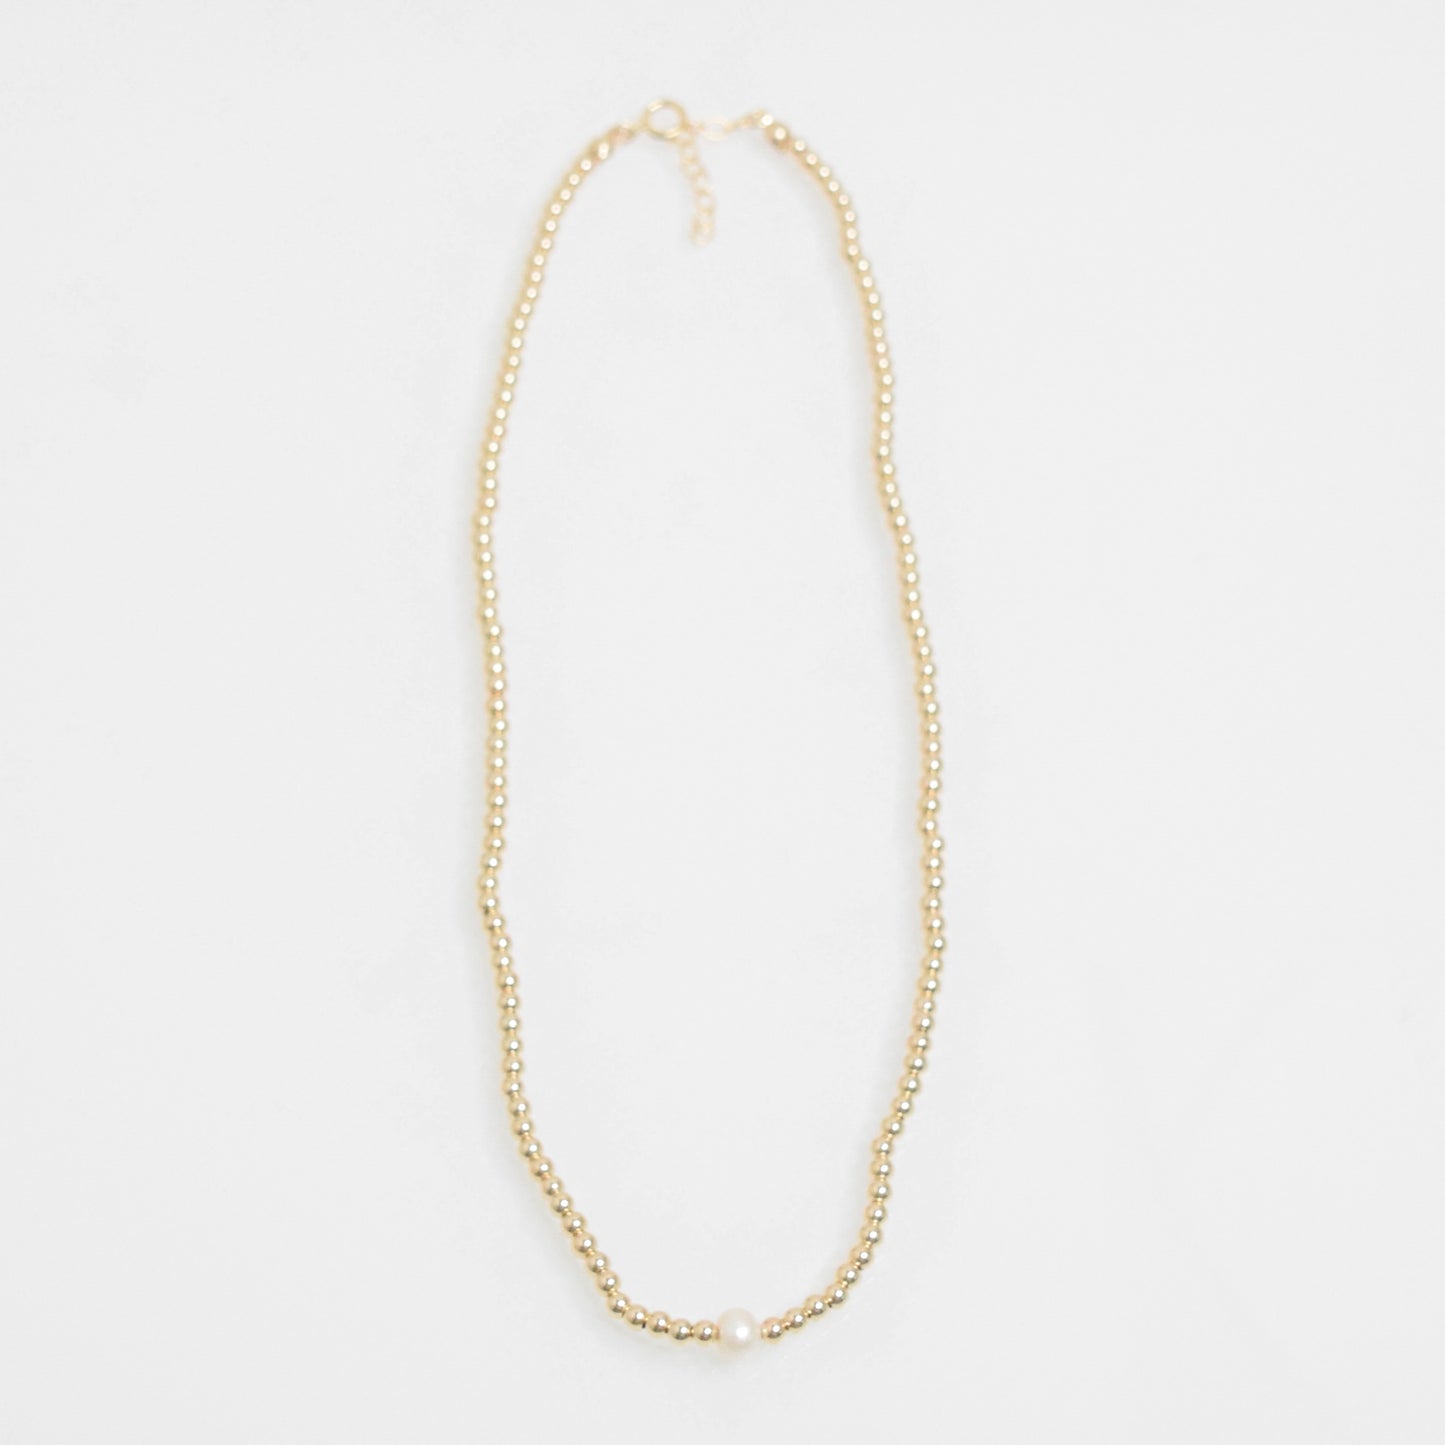 Classy Pearl Necklace